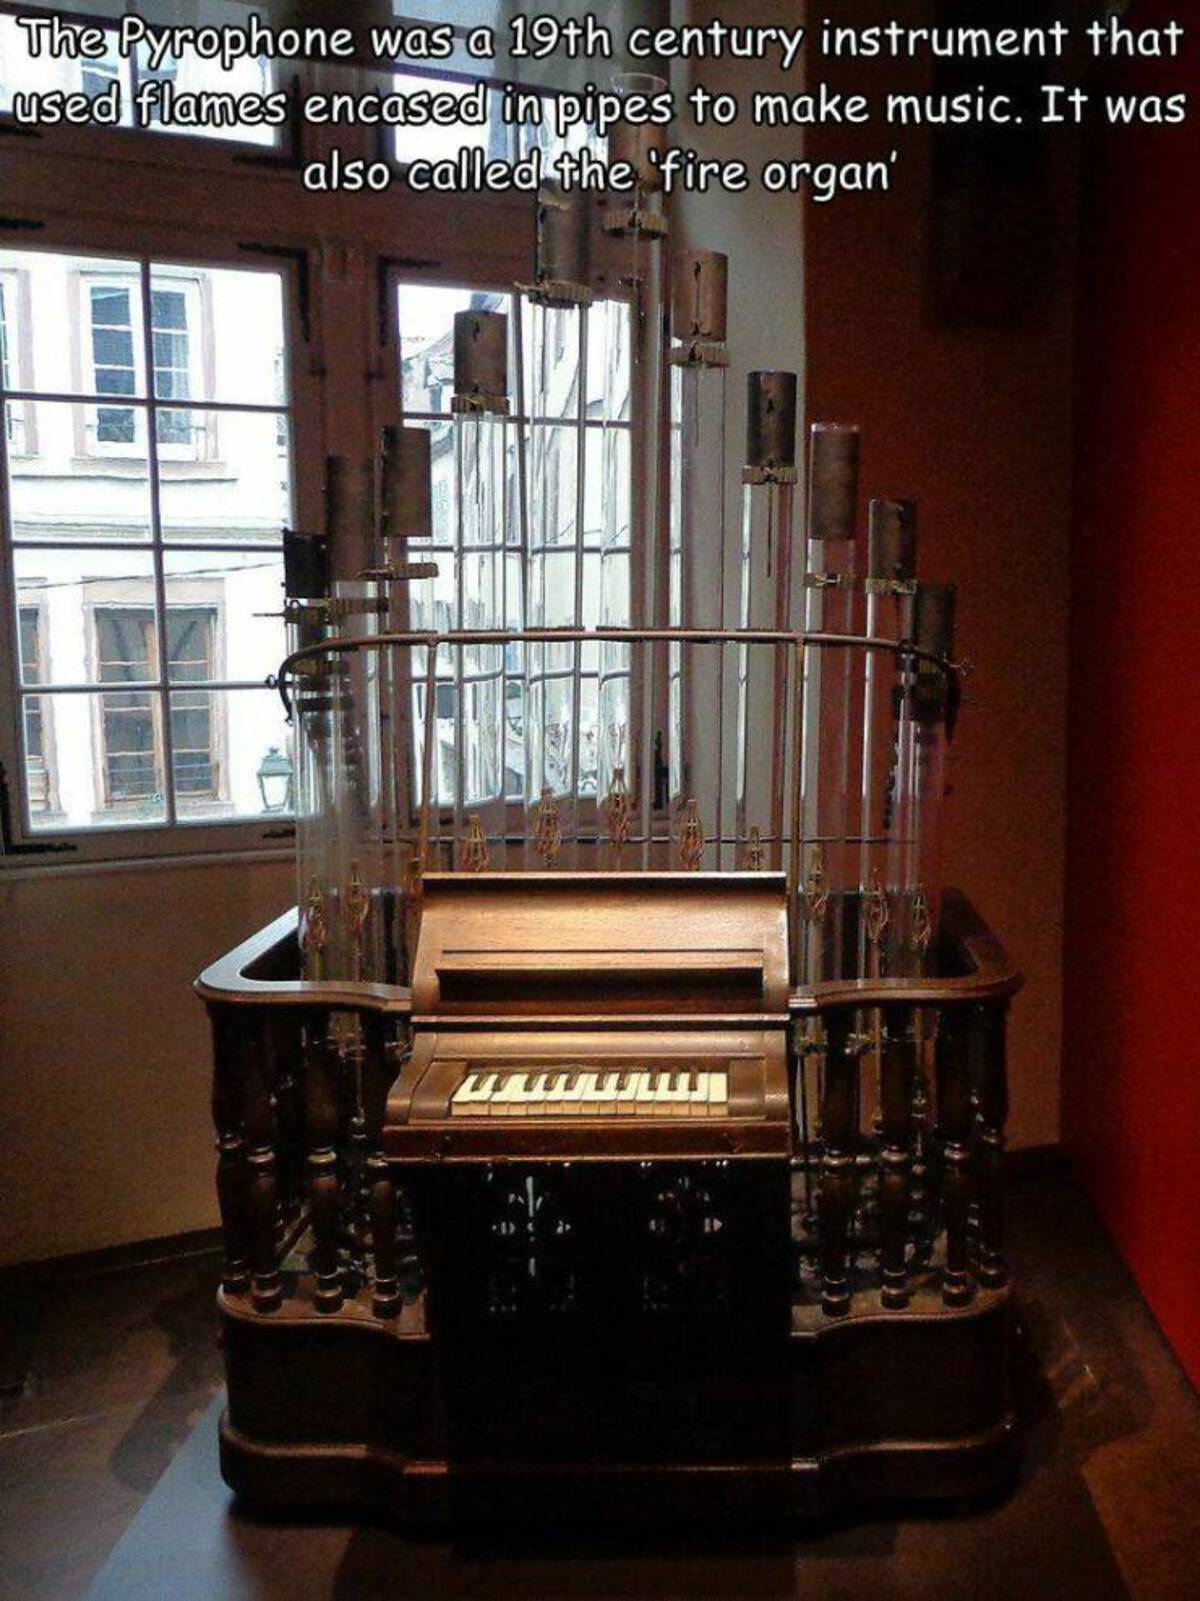 The Pyrophone was a 19th century instrument that used flames encased in pipes to make music. It was also called the 'fire organ'